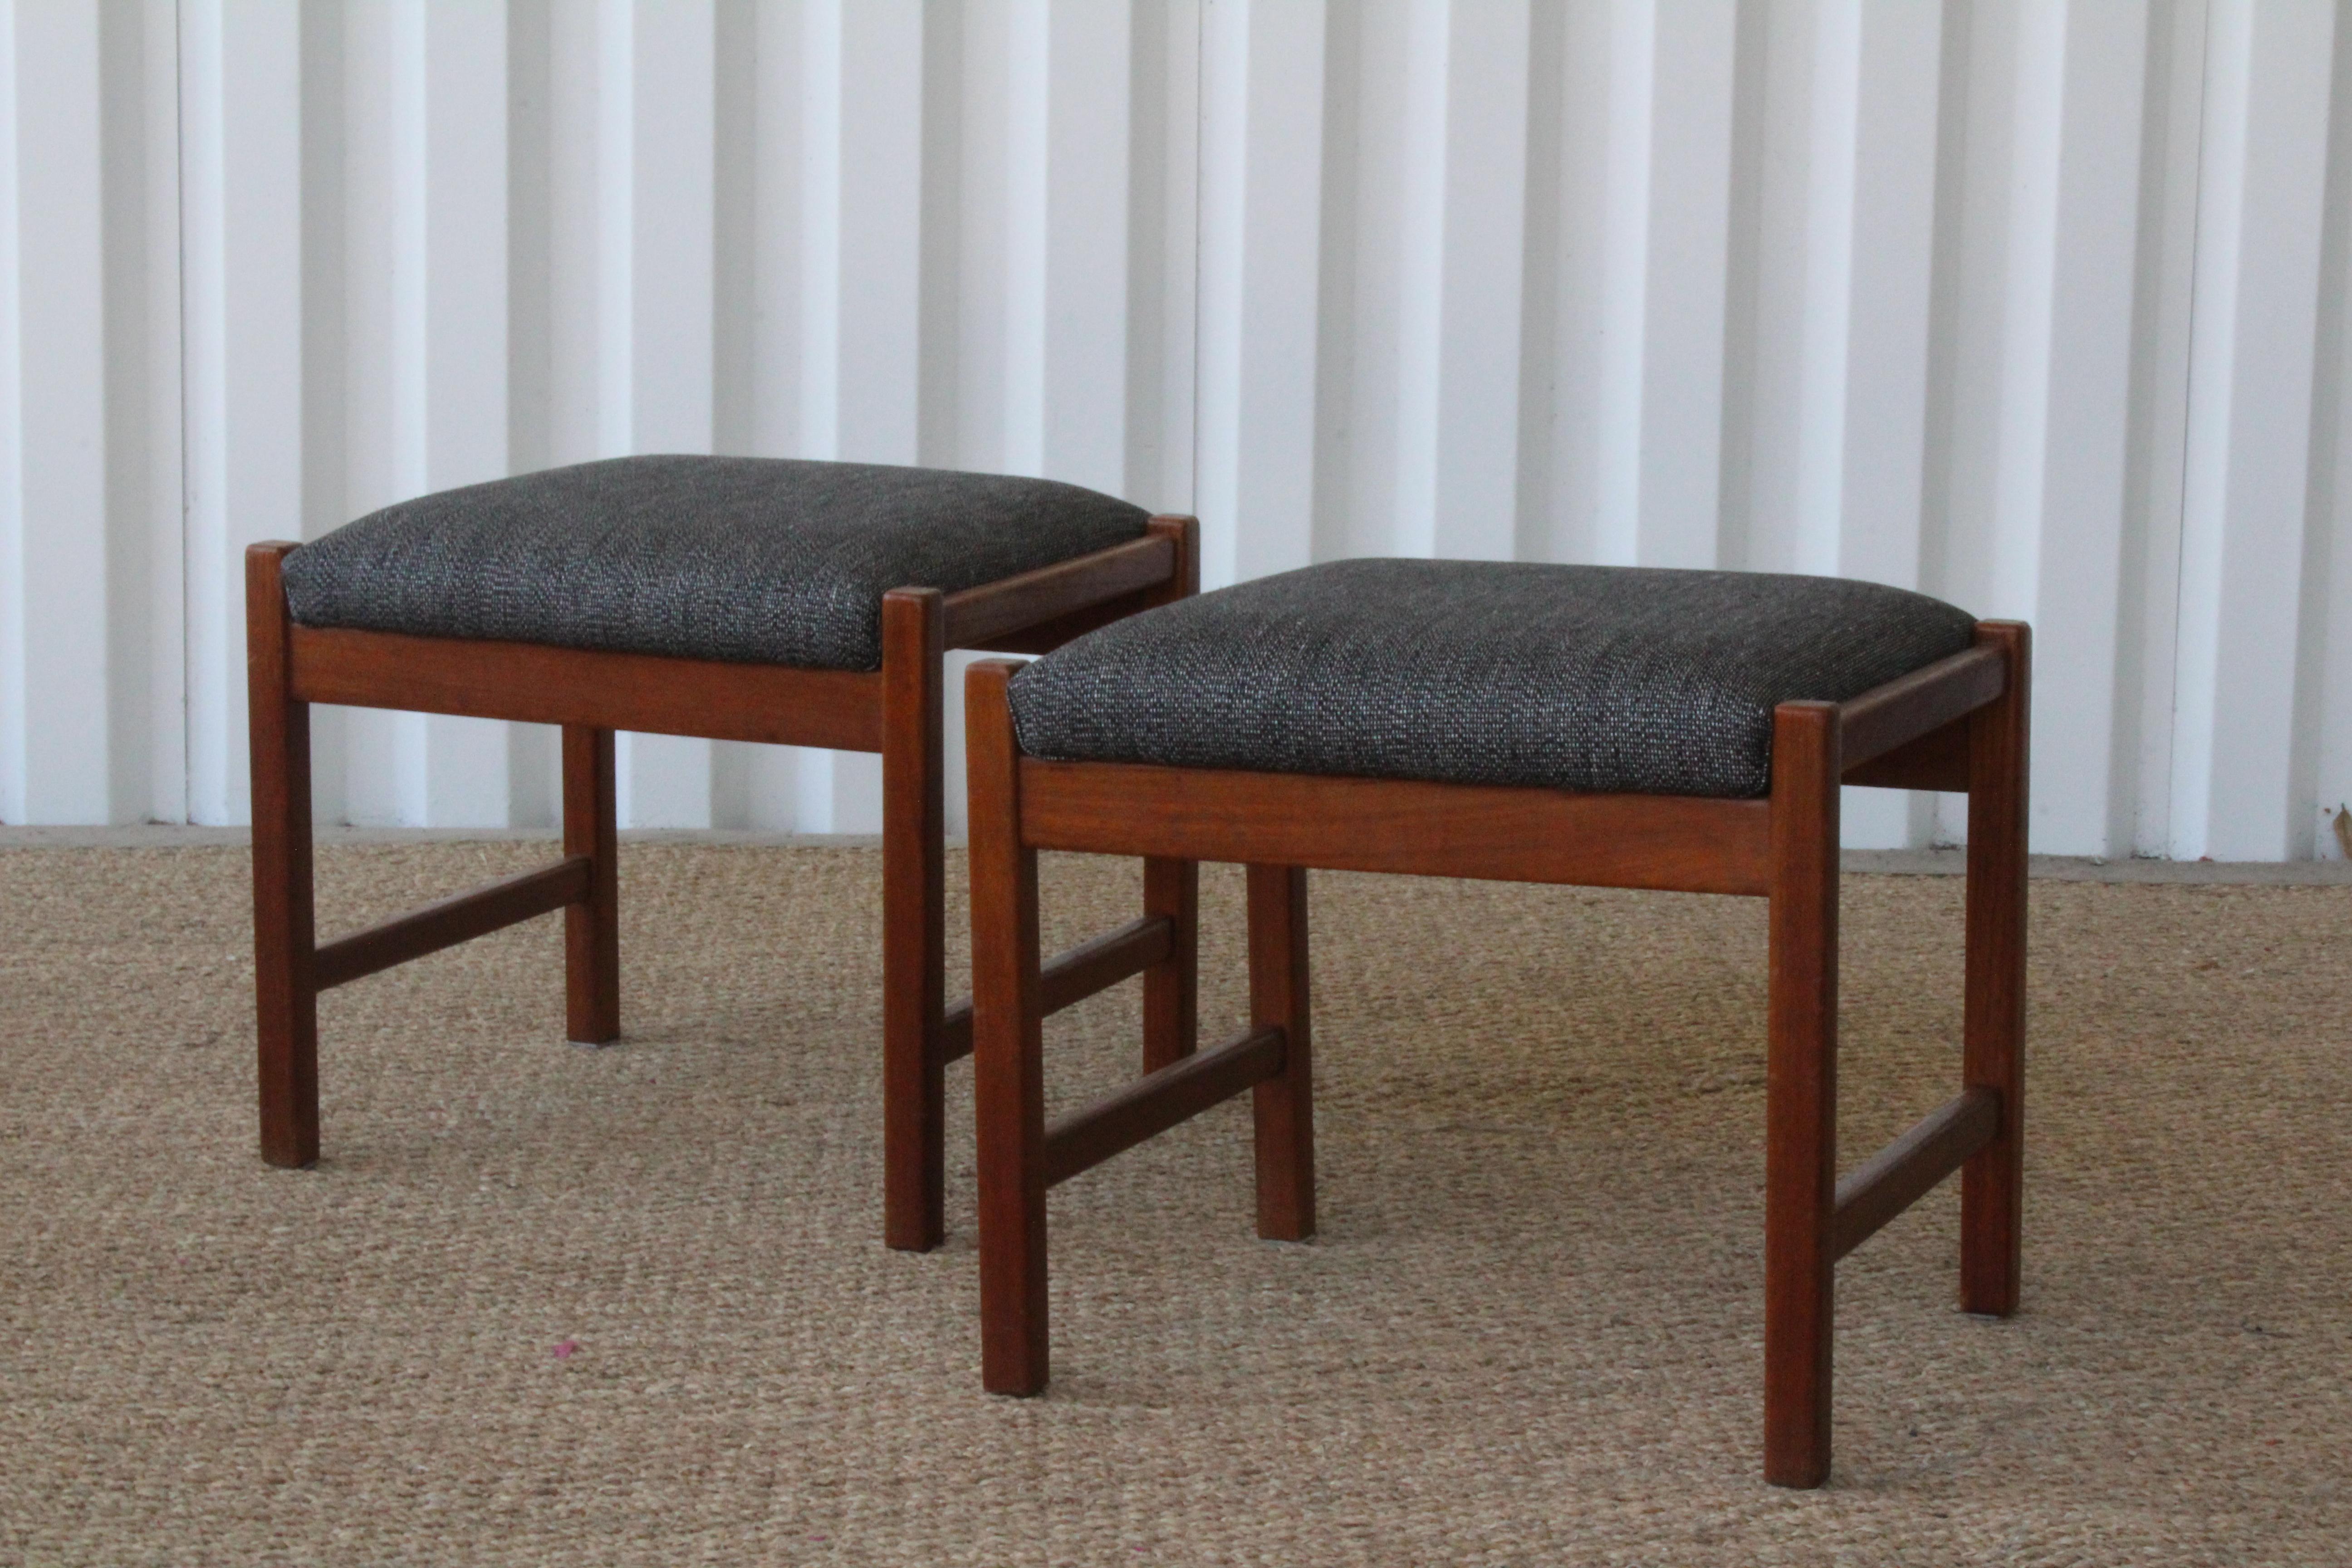 Pair of midcentury Danish modern stools in teak. New grey woven linen upholstery. Both are in excellent condition. Sold as a pair.